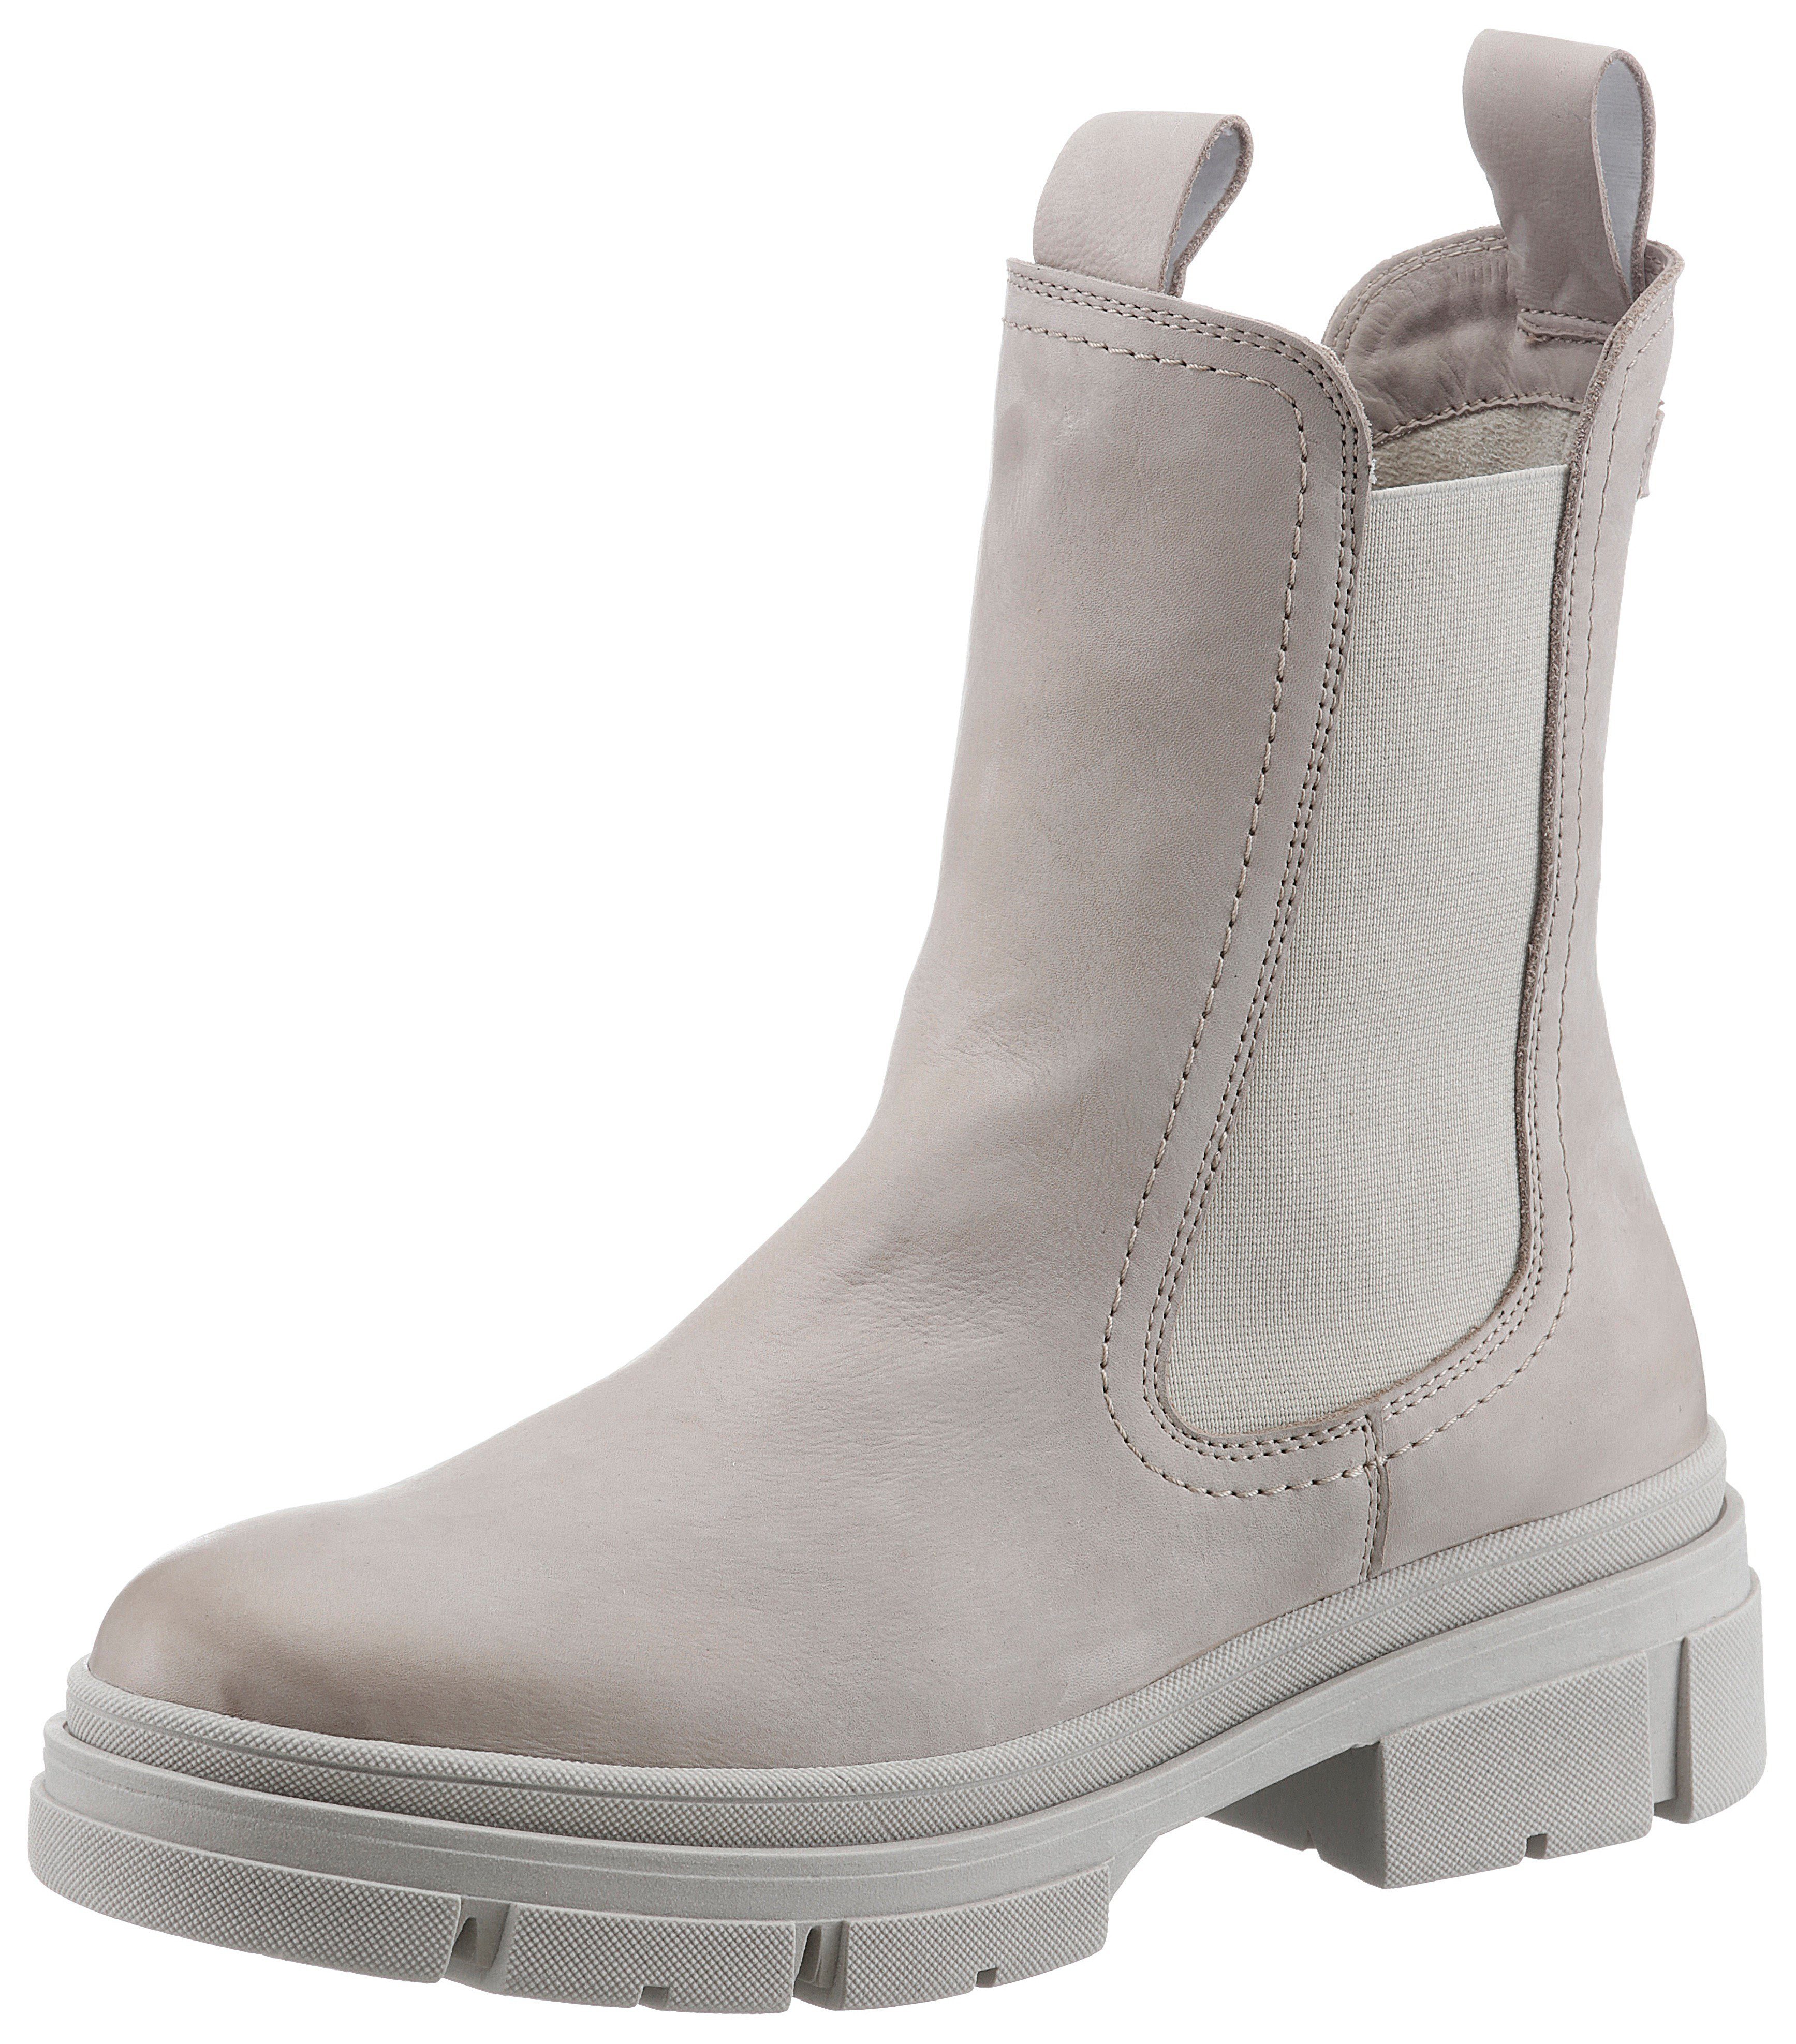 Tamaris Chelseaboots bequemer taupe Form in